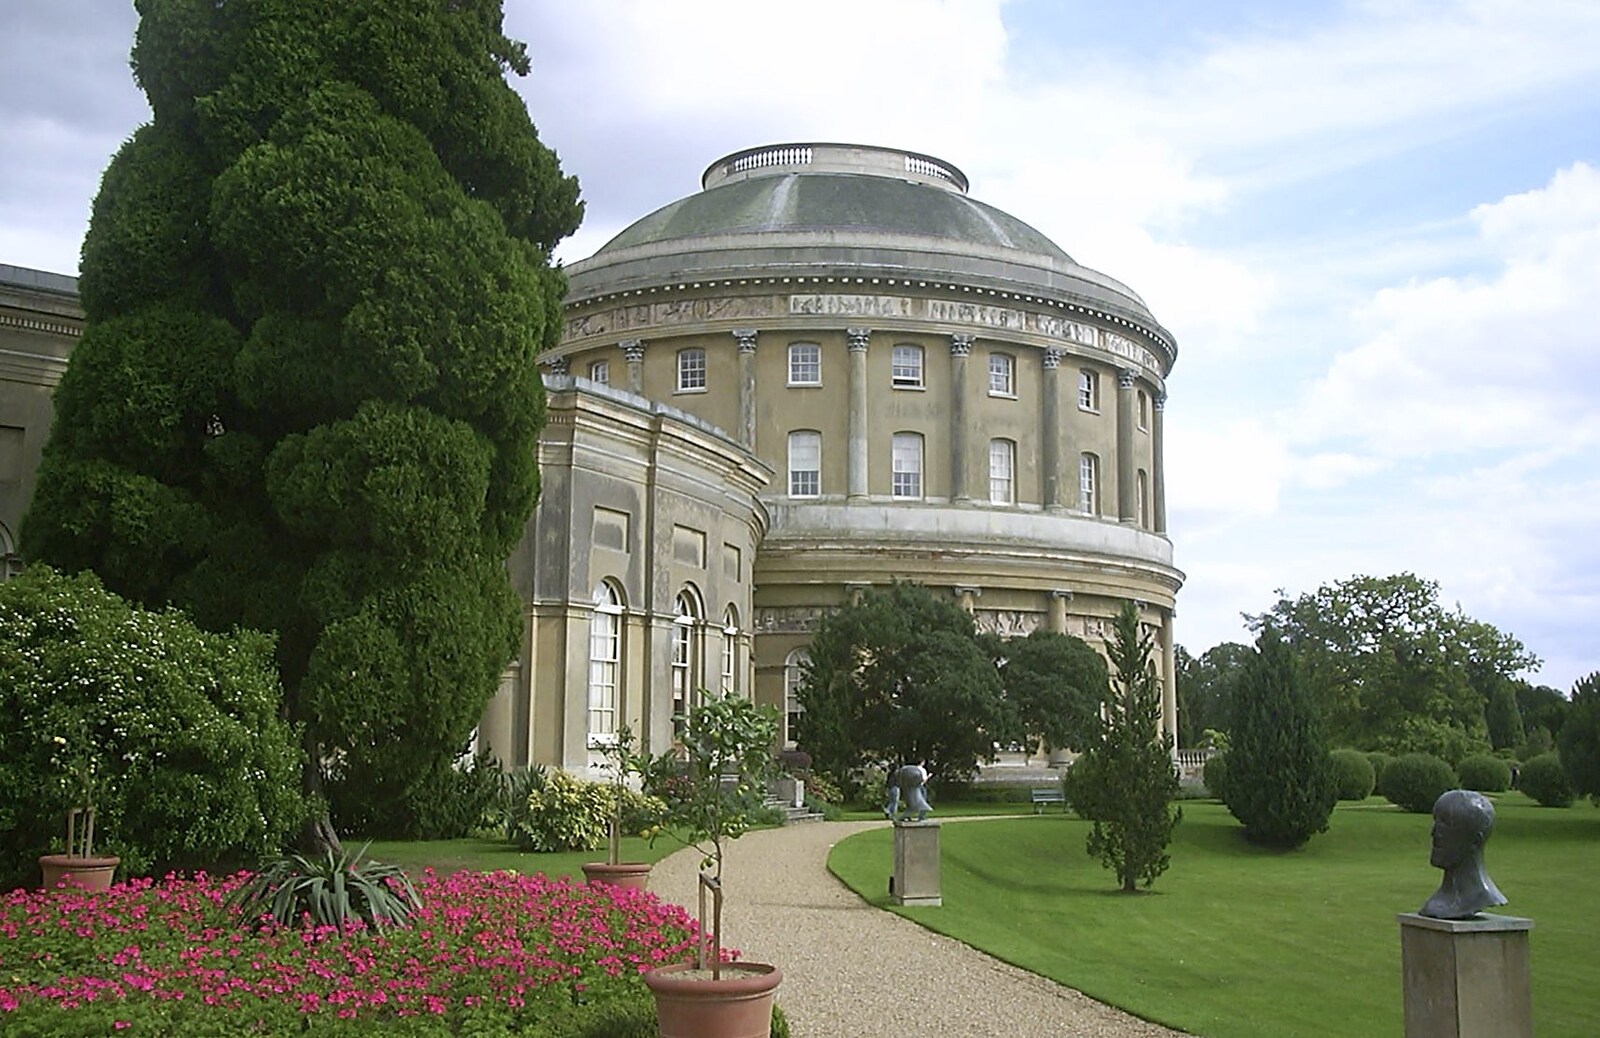 The Rotunda again from A Trip to Ickworth House, Horringer, Suffolk - 22nd August 2004